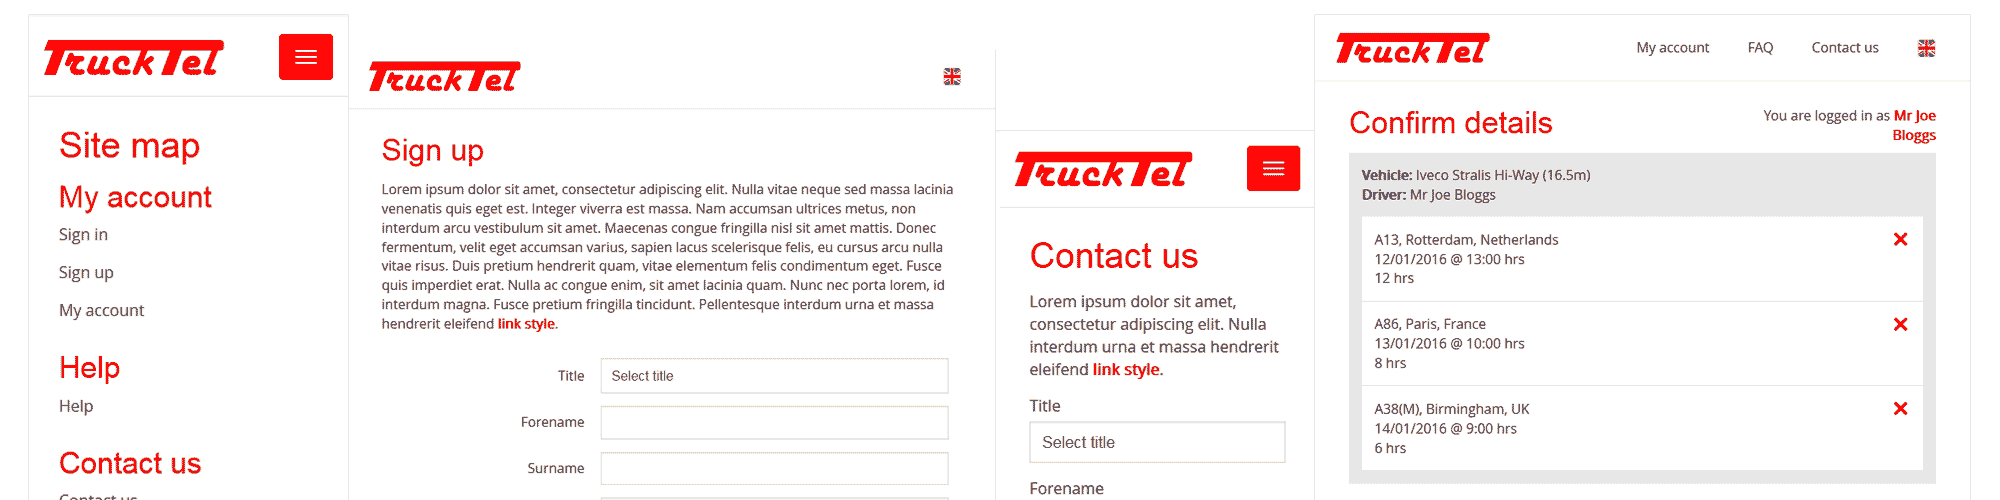 Screenshot of the TruckTel case study by Michael Saunders